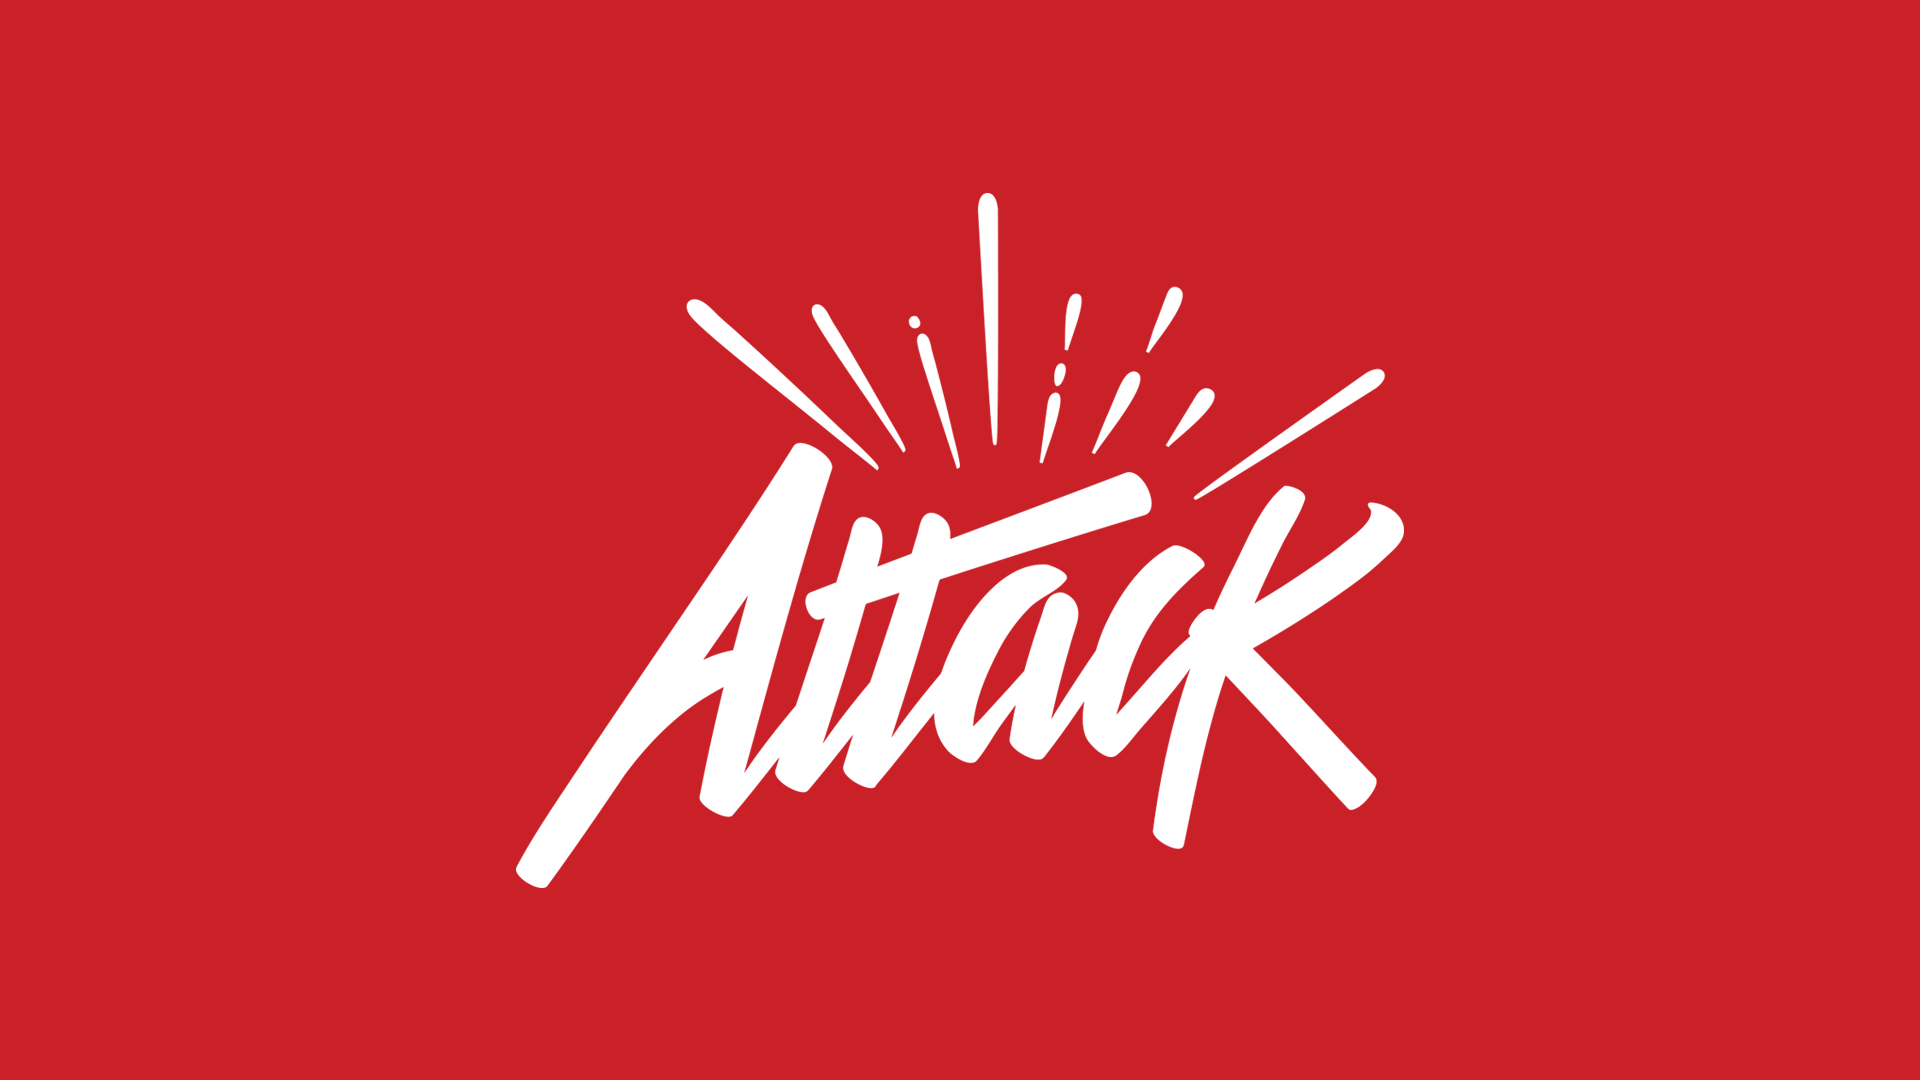 Motion Attack cover image